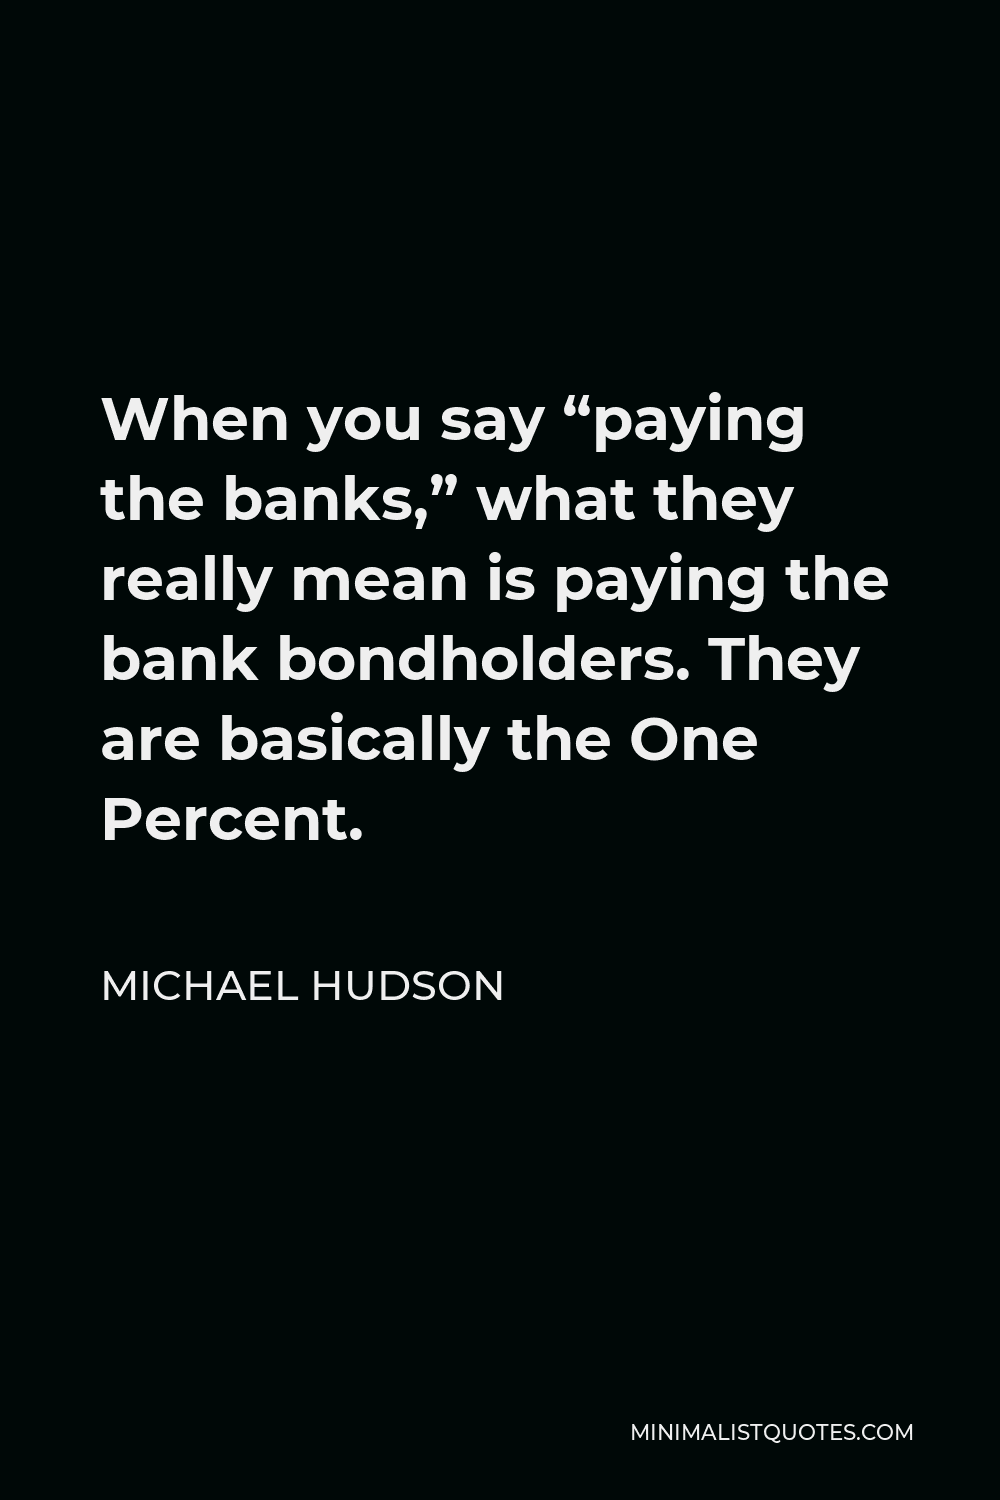 Michael Hudson Quote - When you say “paying the banks,” what they really mean is paying the bank bondholders. They are basically the One Percent.